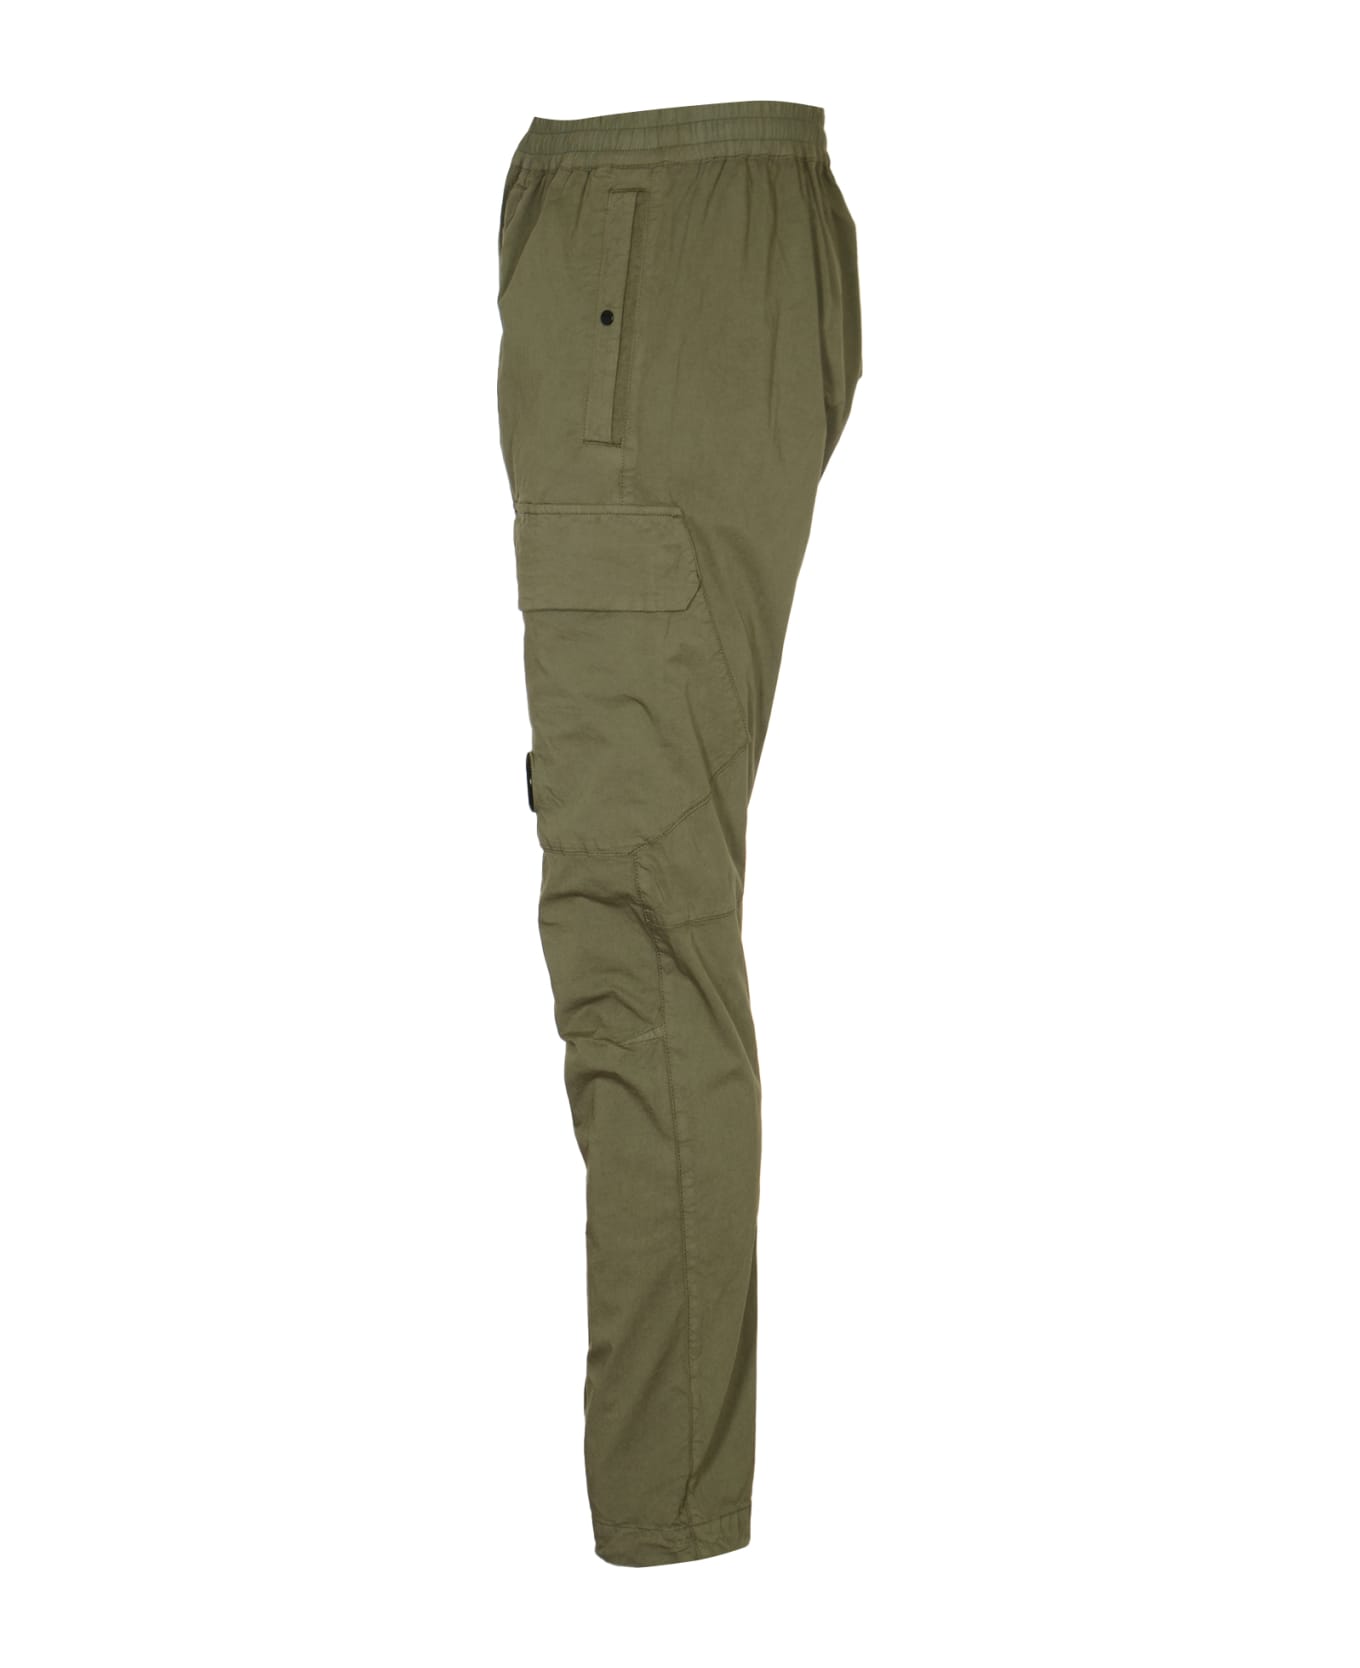 C.P. Company Twill Stretch Cargo Pants - AGAVE GREEN ボトムス